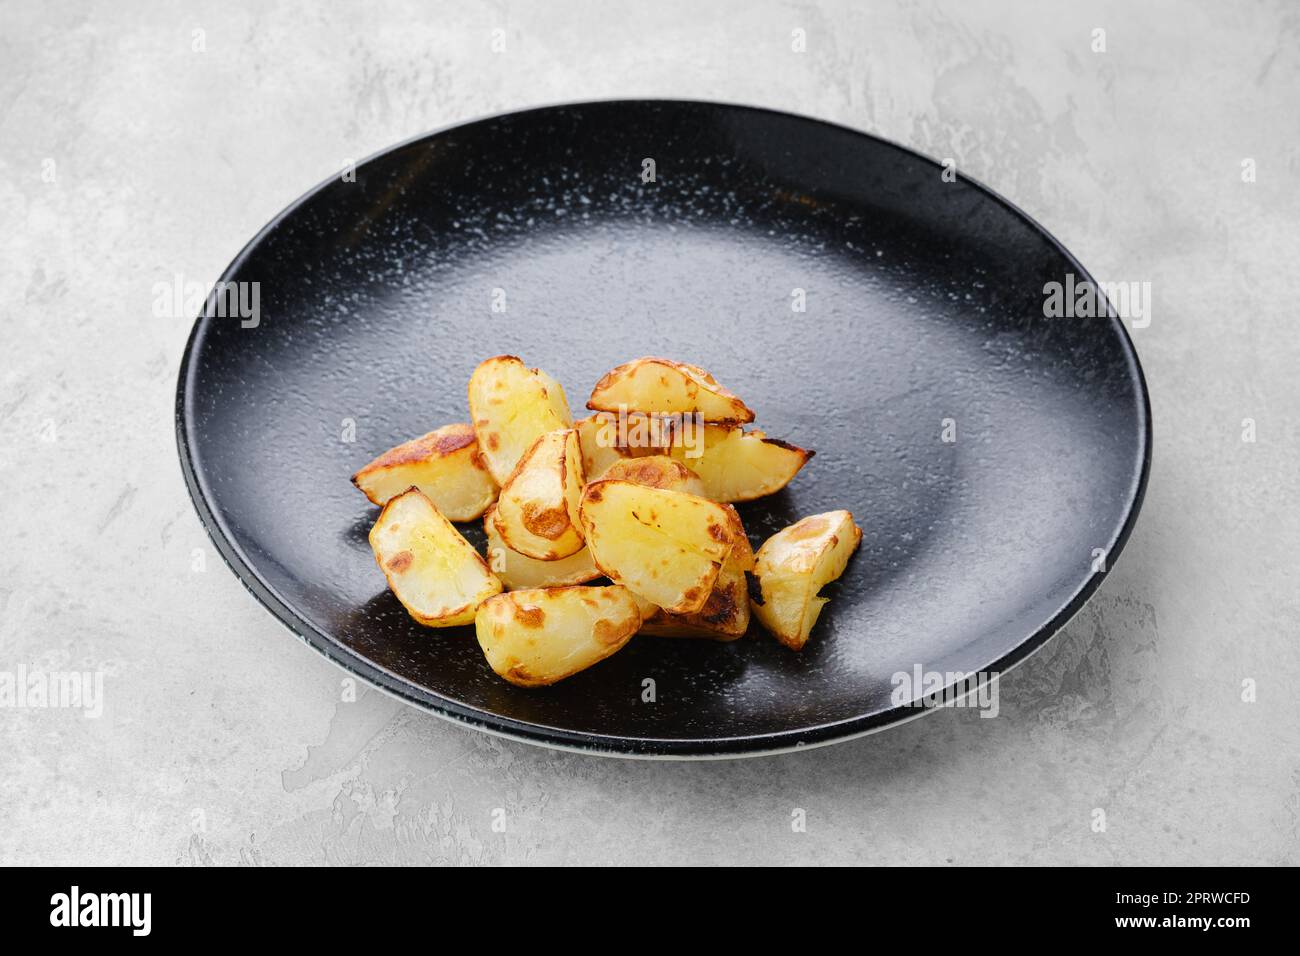 Slices of boiled potatoes fried in oil Stock Photo